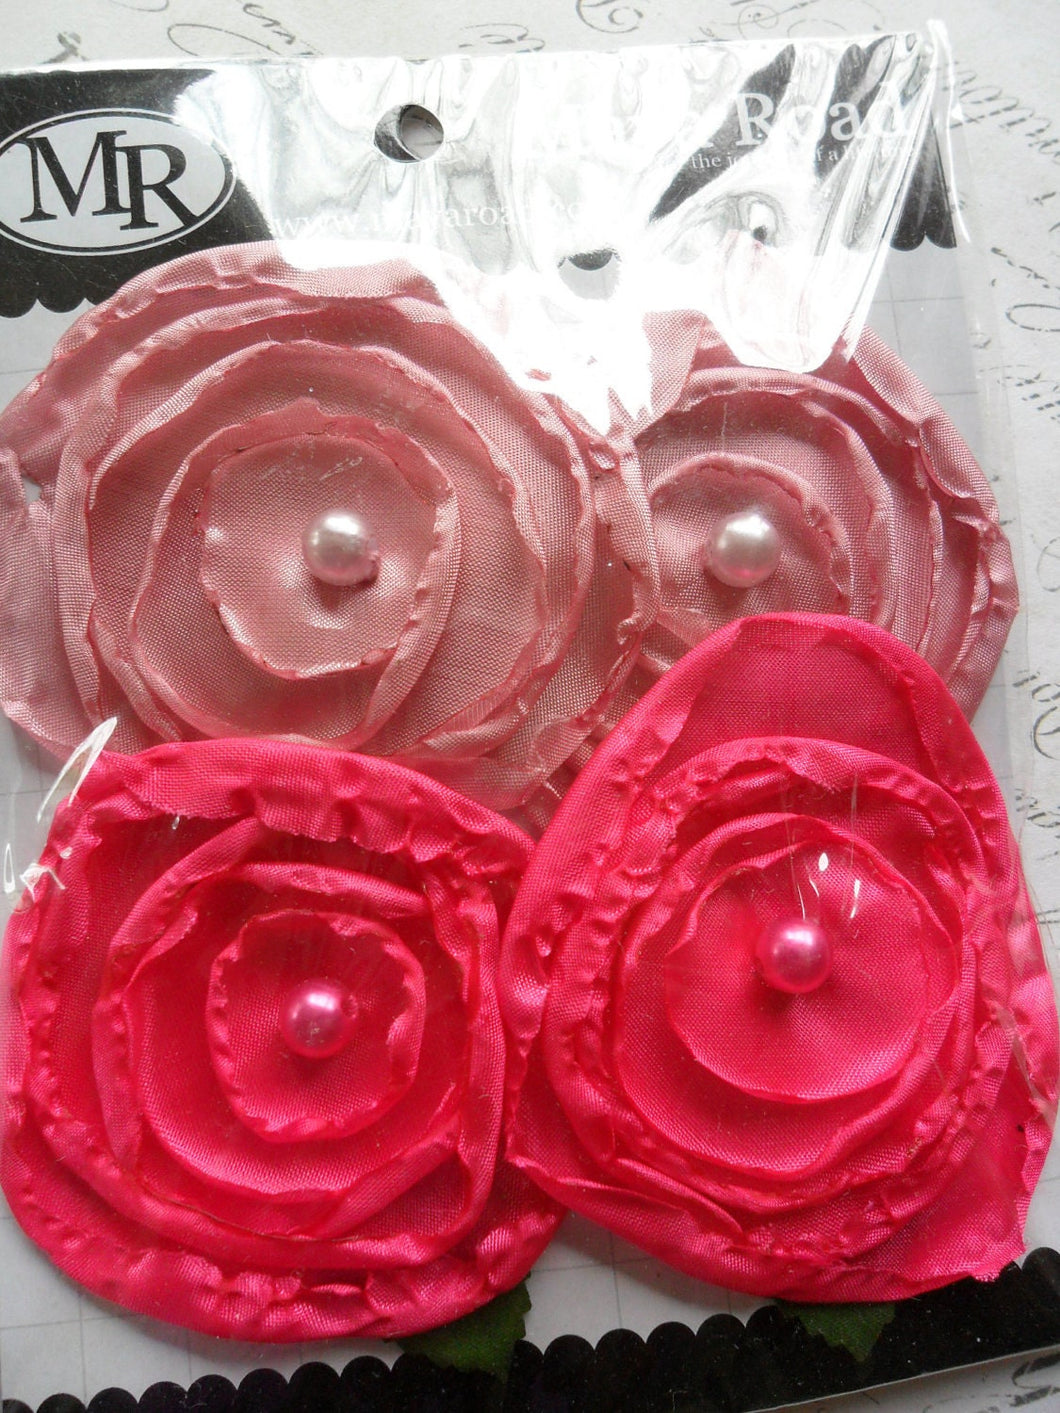 Singed Satin Roses in Blushing Rose and Hot Pink with Pearl centers